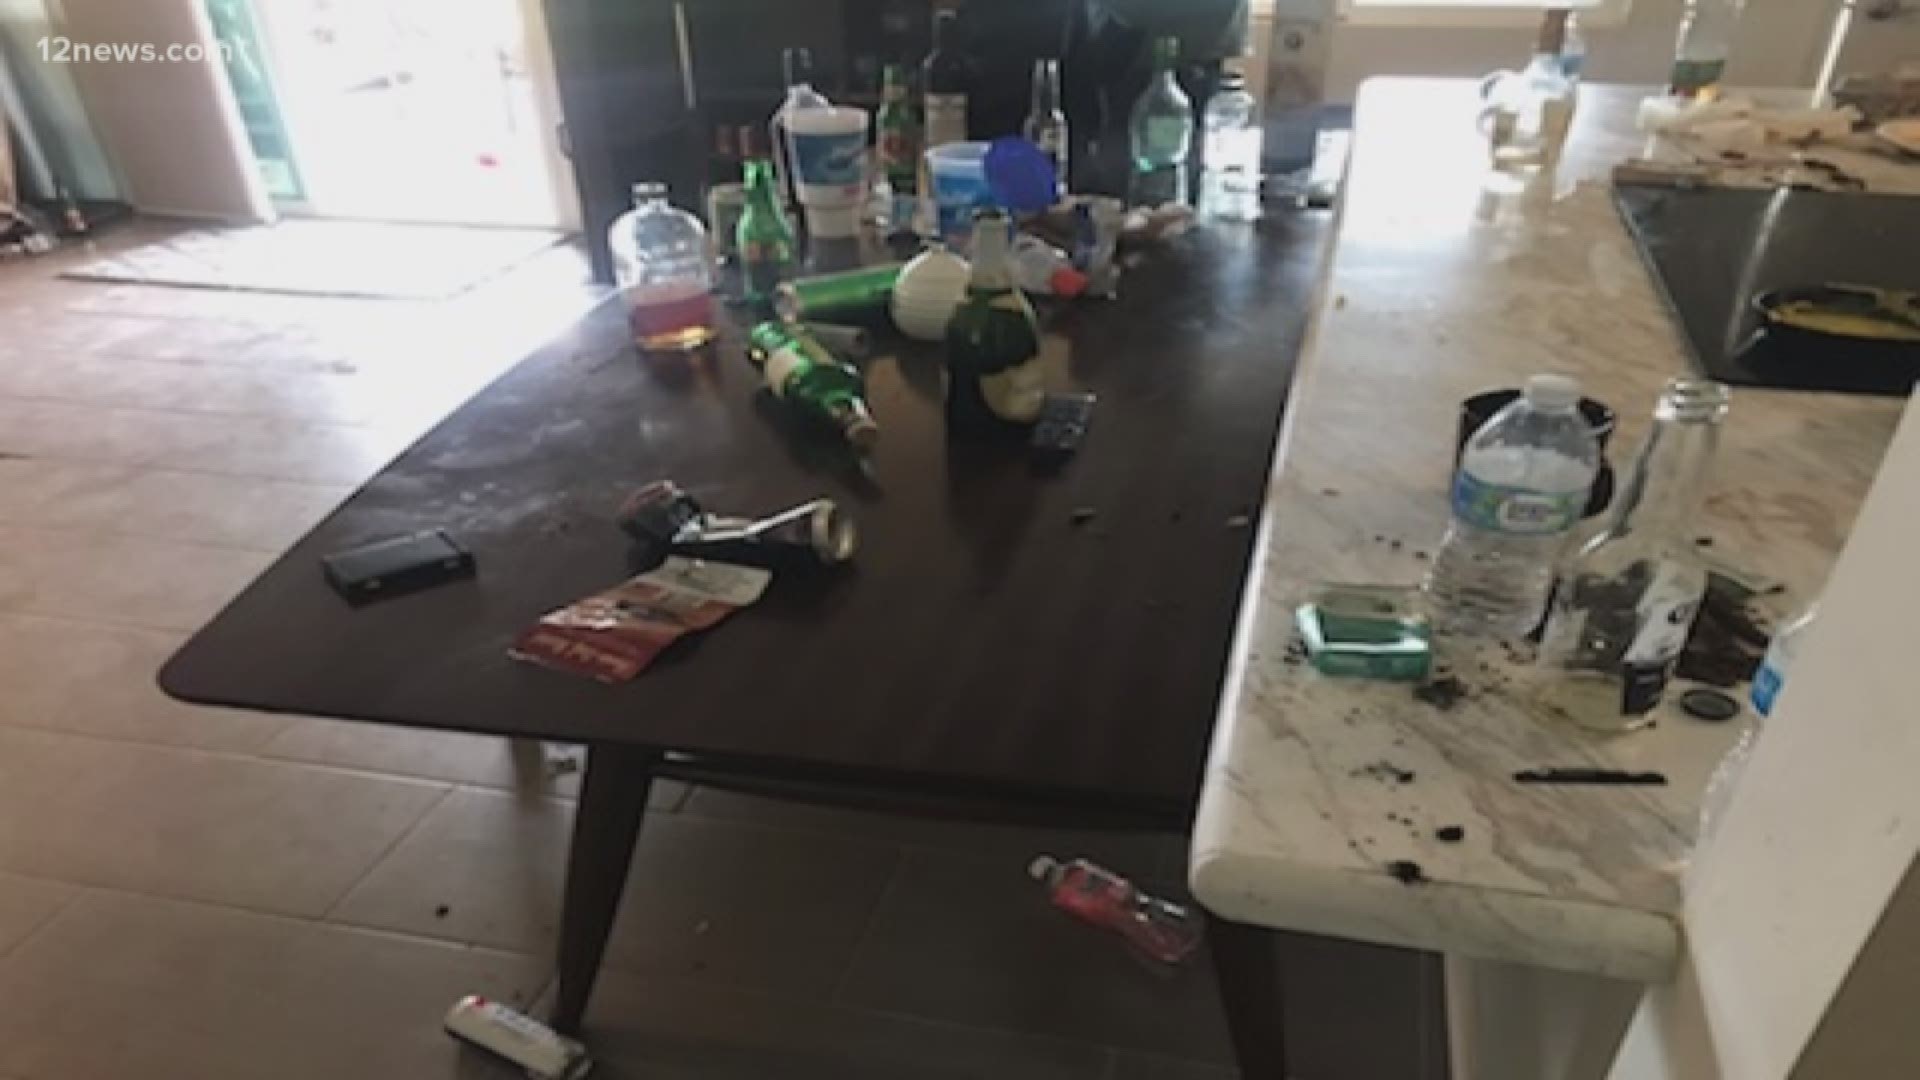 A Tempe man rented his house on Airbnb and came back to find it trashed. He estimates that $16,000 in damage has been done to the home. The renter used a fake name and is long gone.